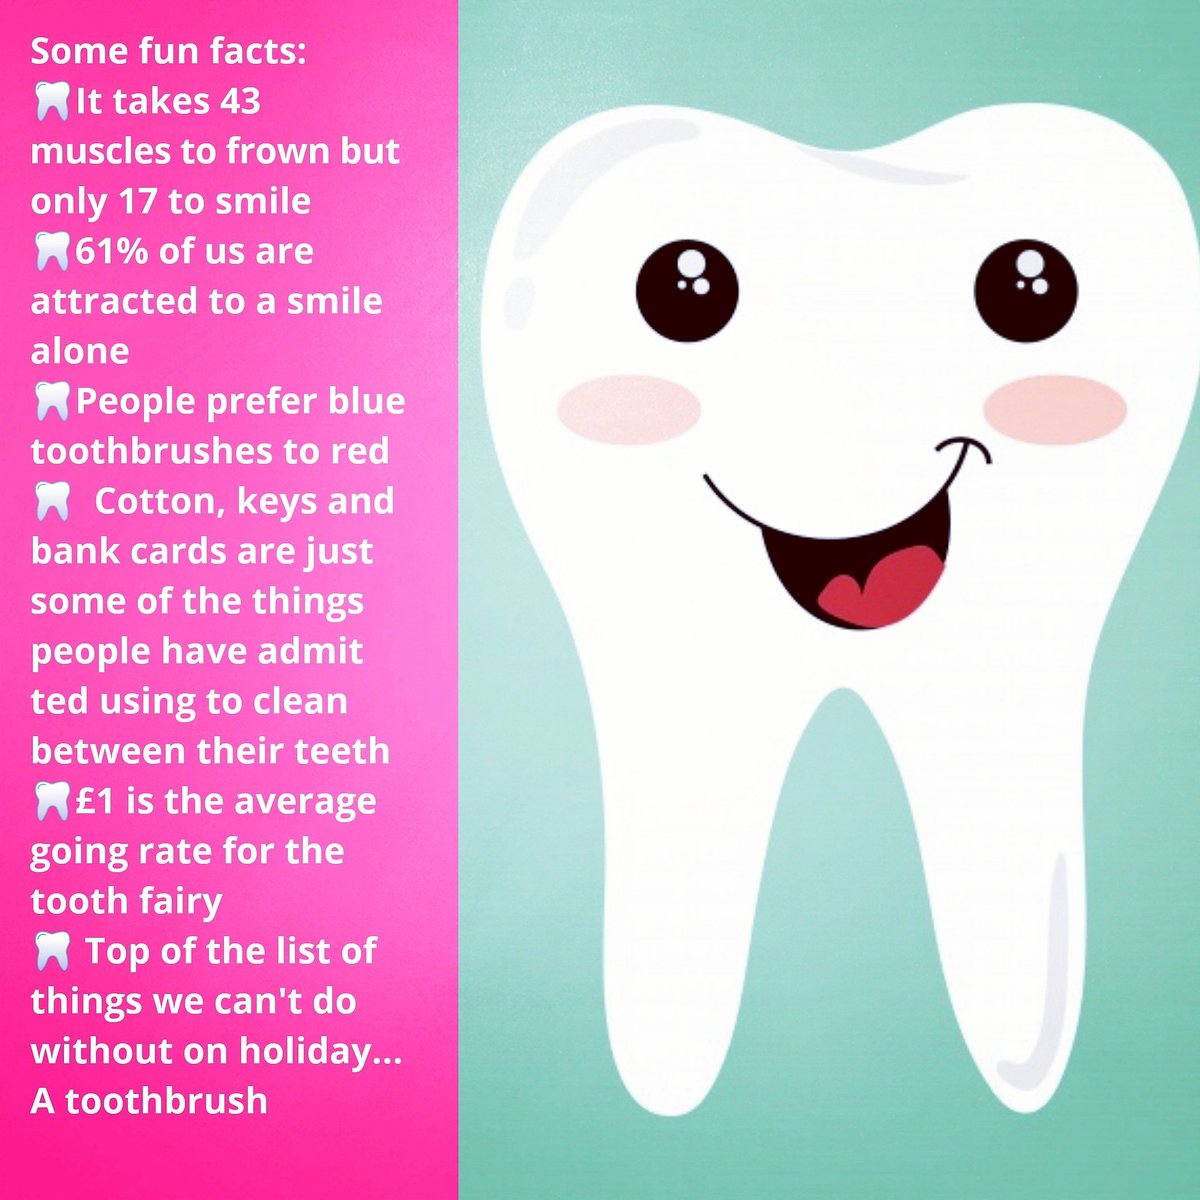 Some fun facts for a Monday 🦷😊 do you have any to add? 

#funfacts #dental #dentallife #tooth #justforfun #shareyours